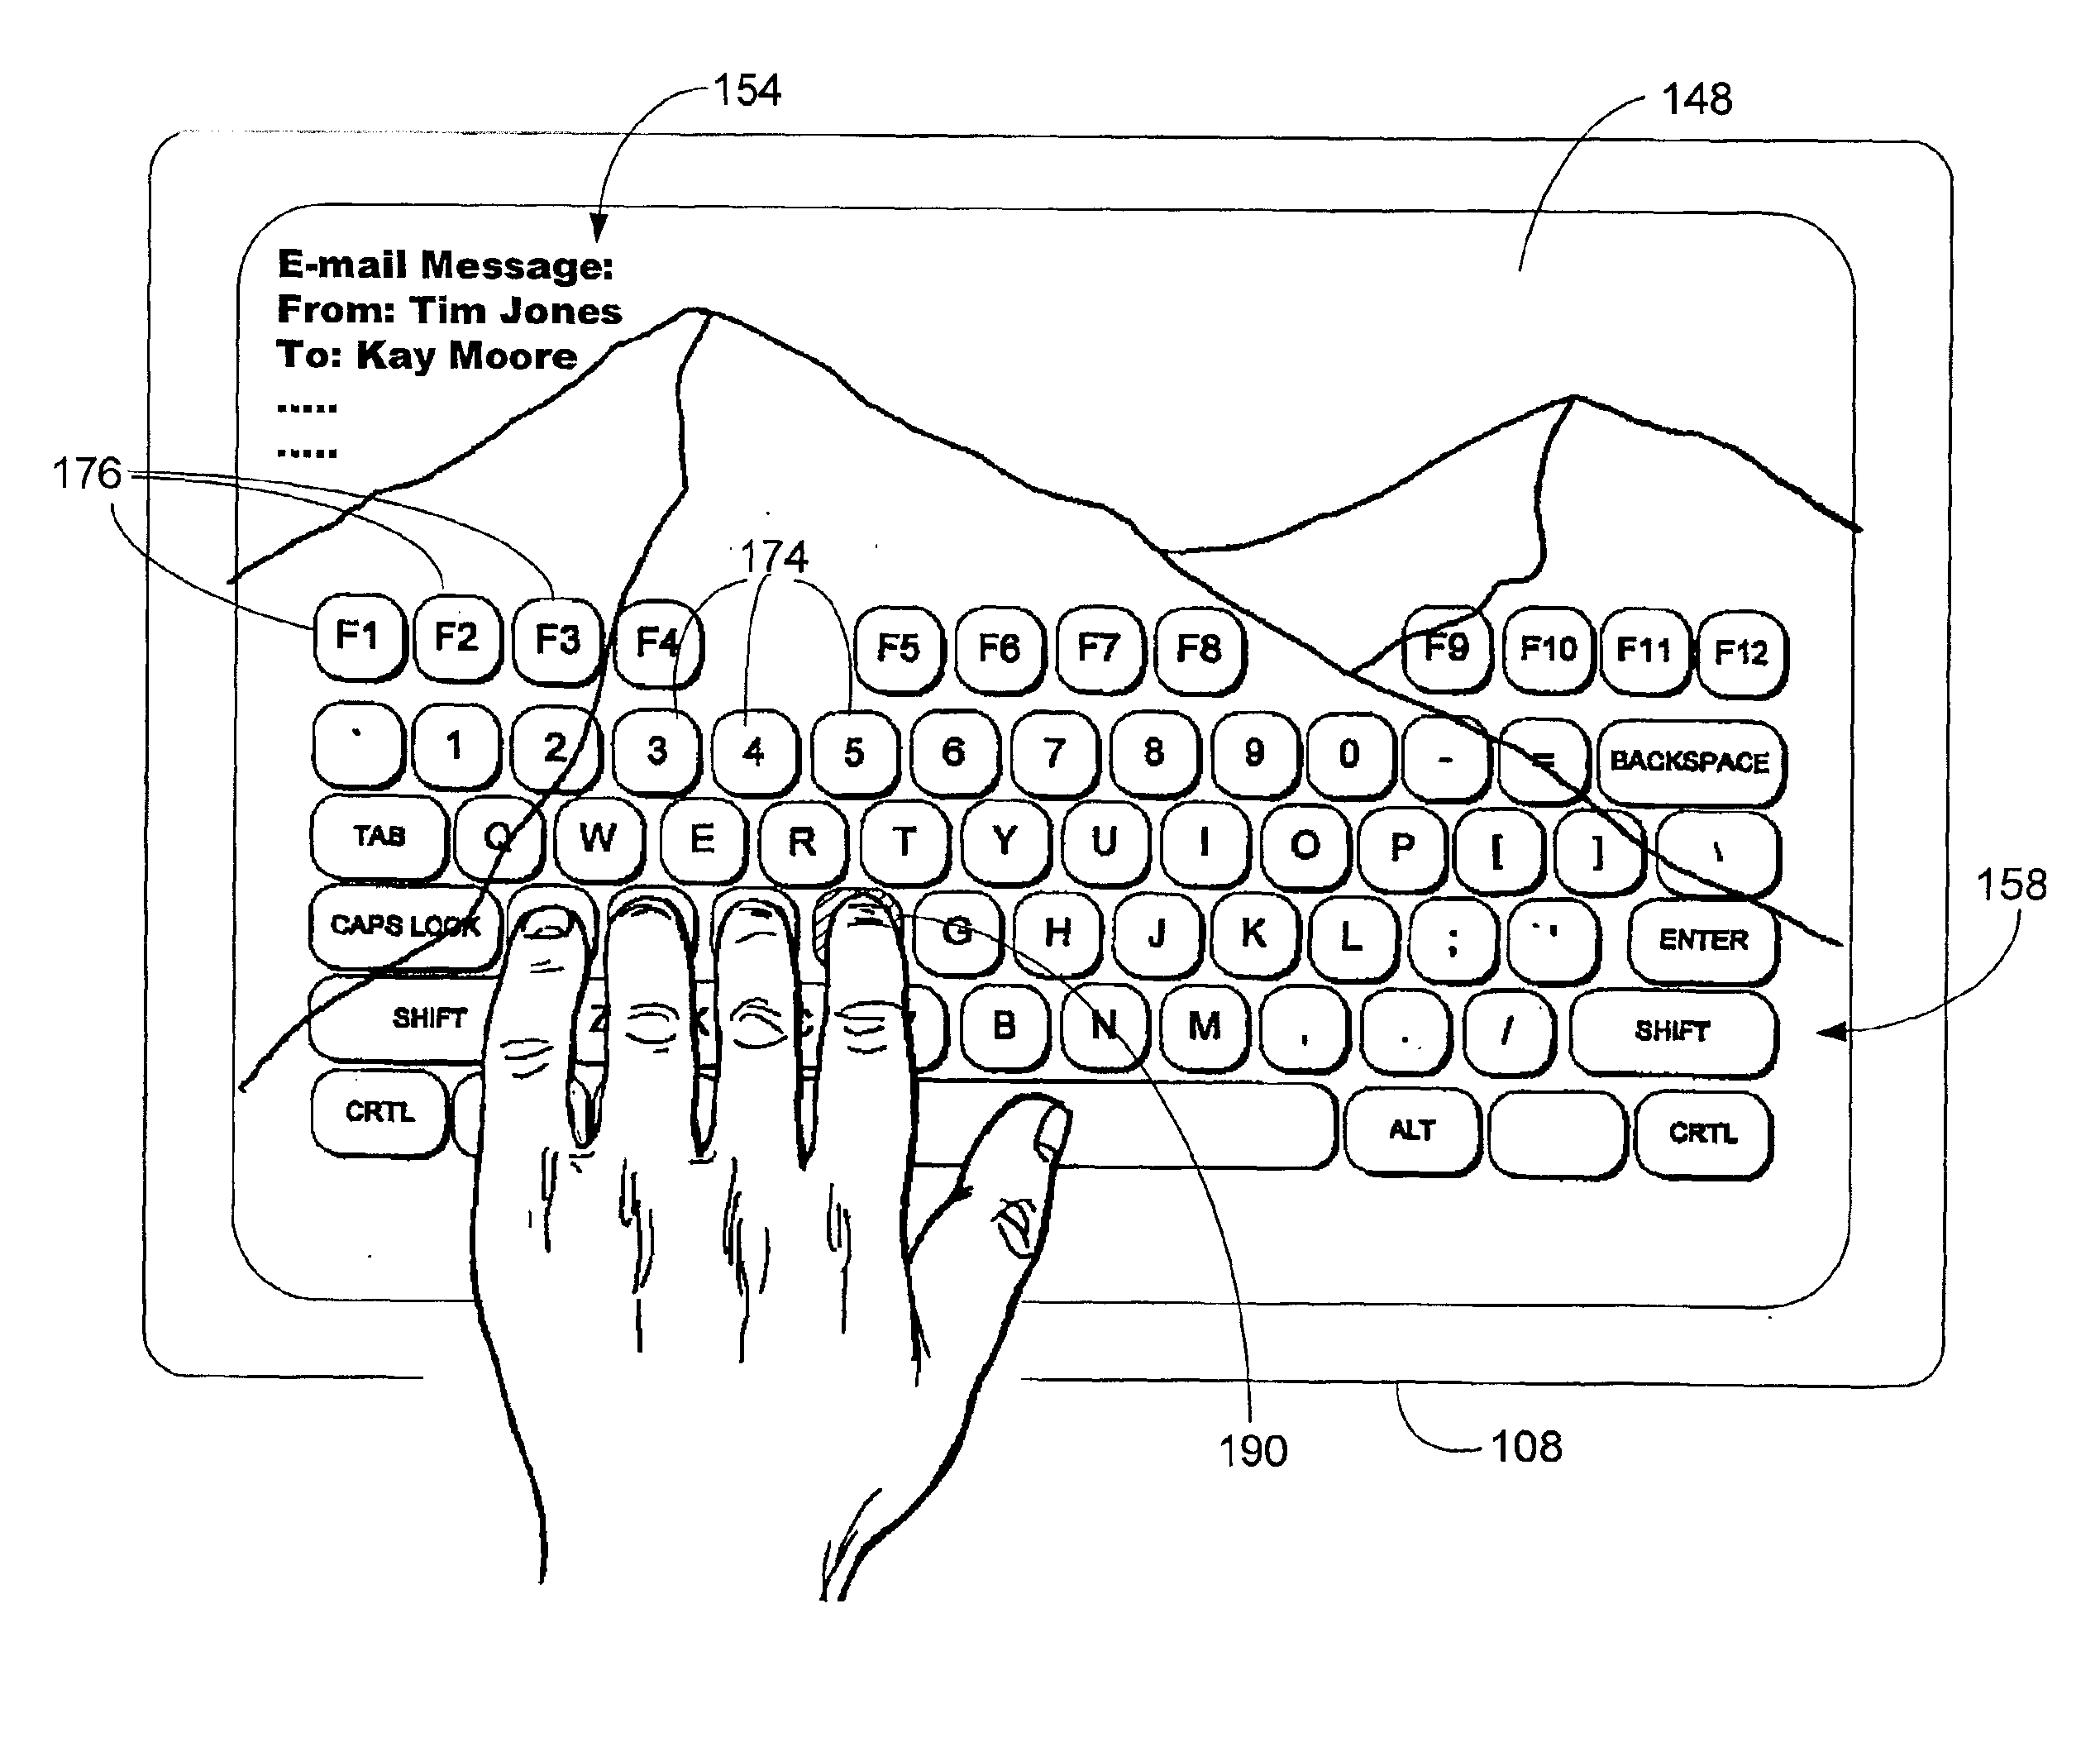 Virtual keyboard for touch-typing using audio feedback